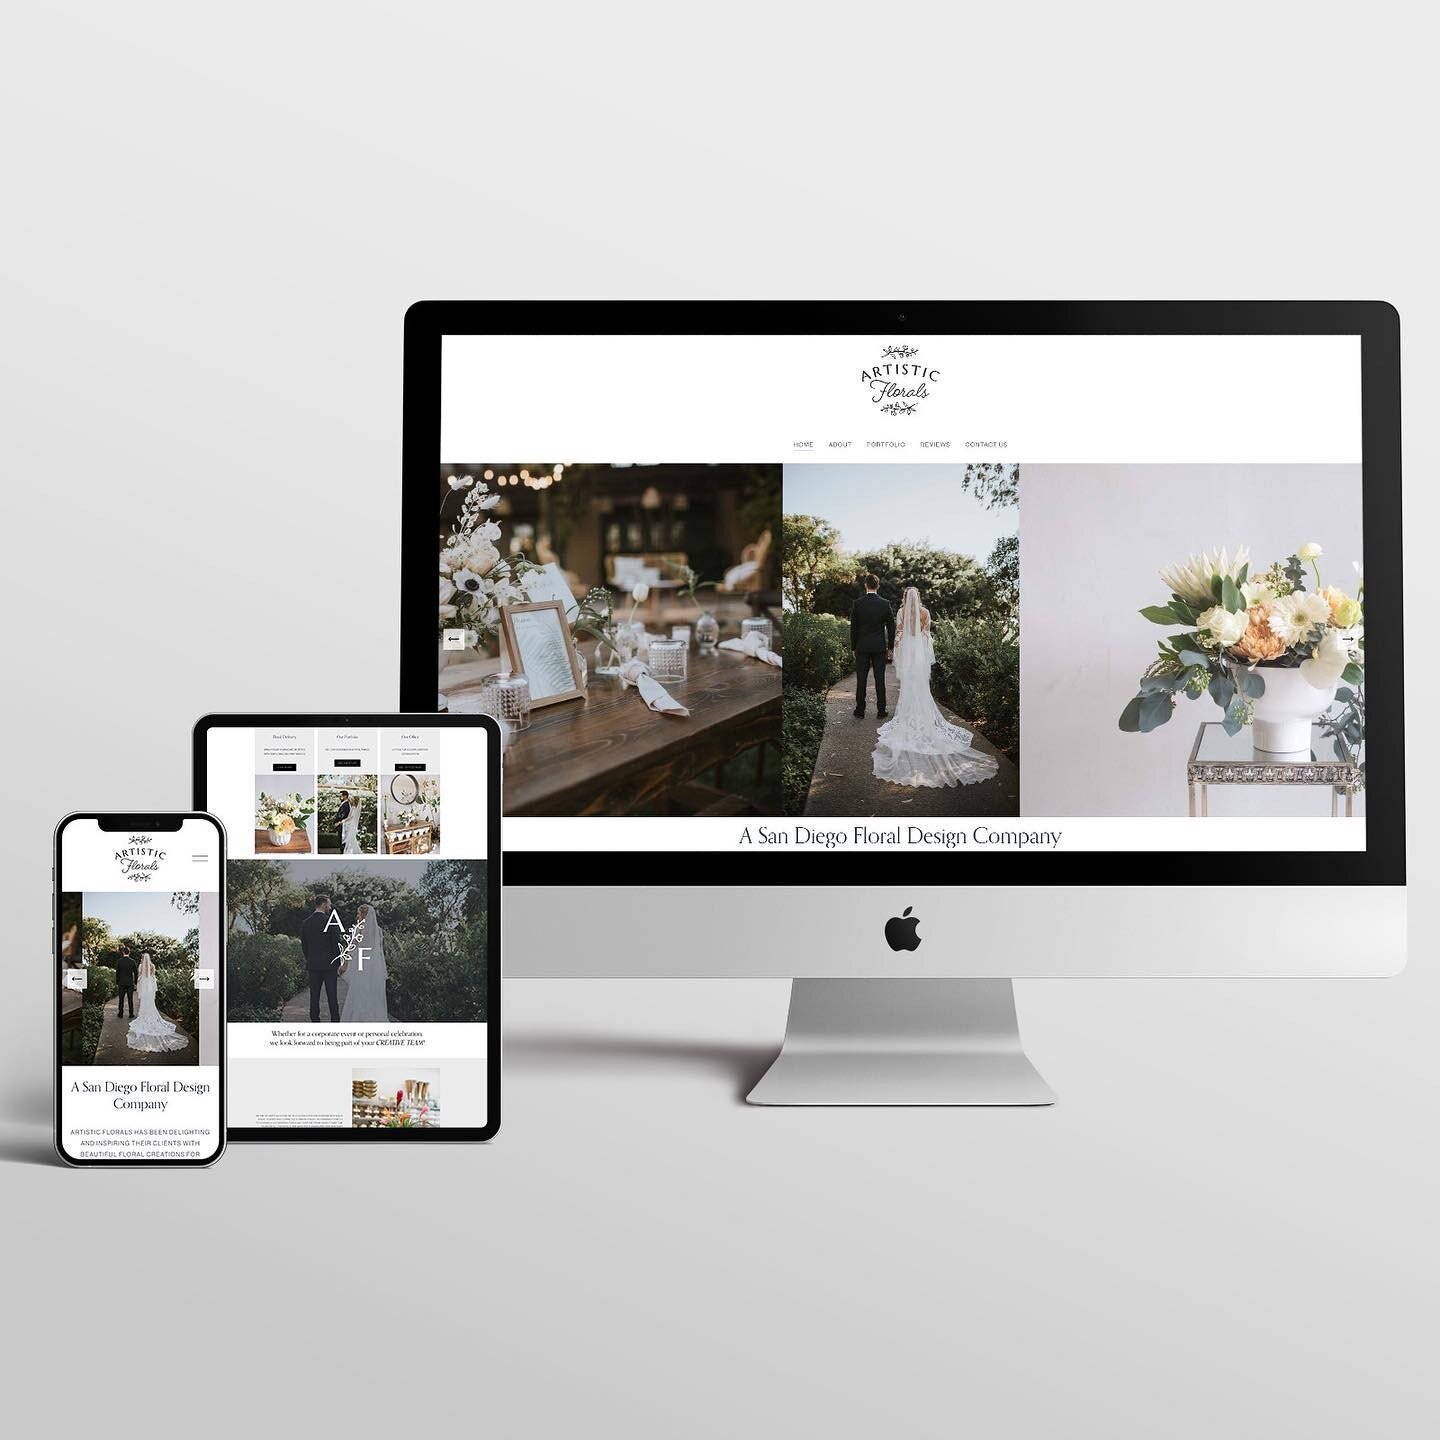 LOVED designing The San Francisco for @artisticflorals 👏🏻👏🏻👏🏻 this transformation was INCREDIBLE!!! Such a level up 😍 #websitelaunch #sandiegoflorists #websitedesign #websitedesigner #weddingflorals #sandiegoweddings